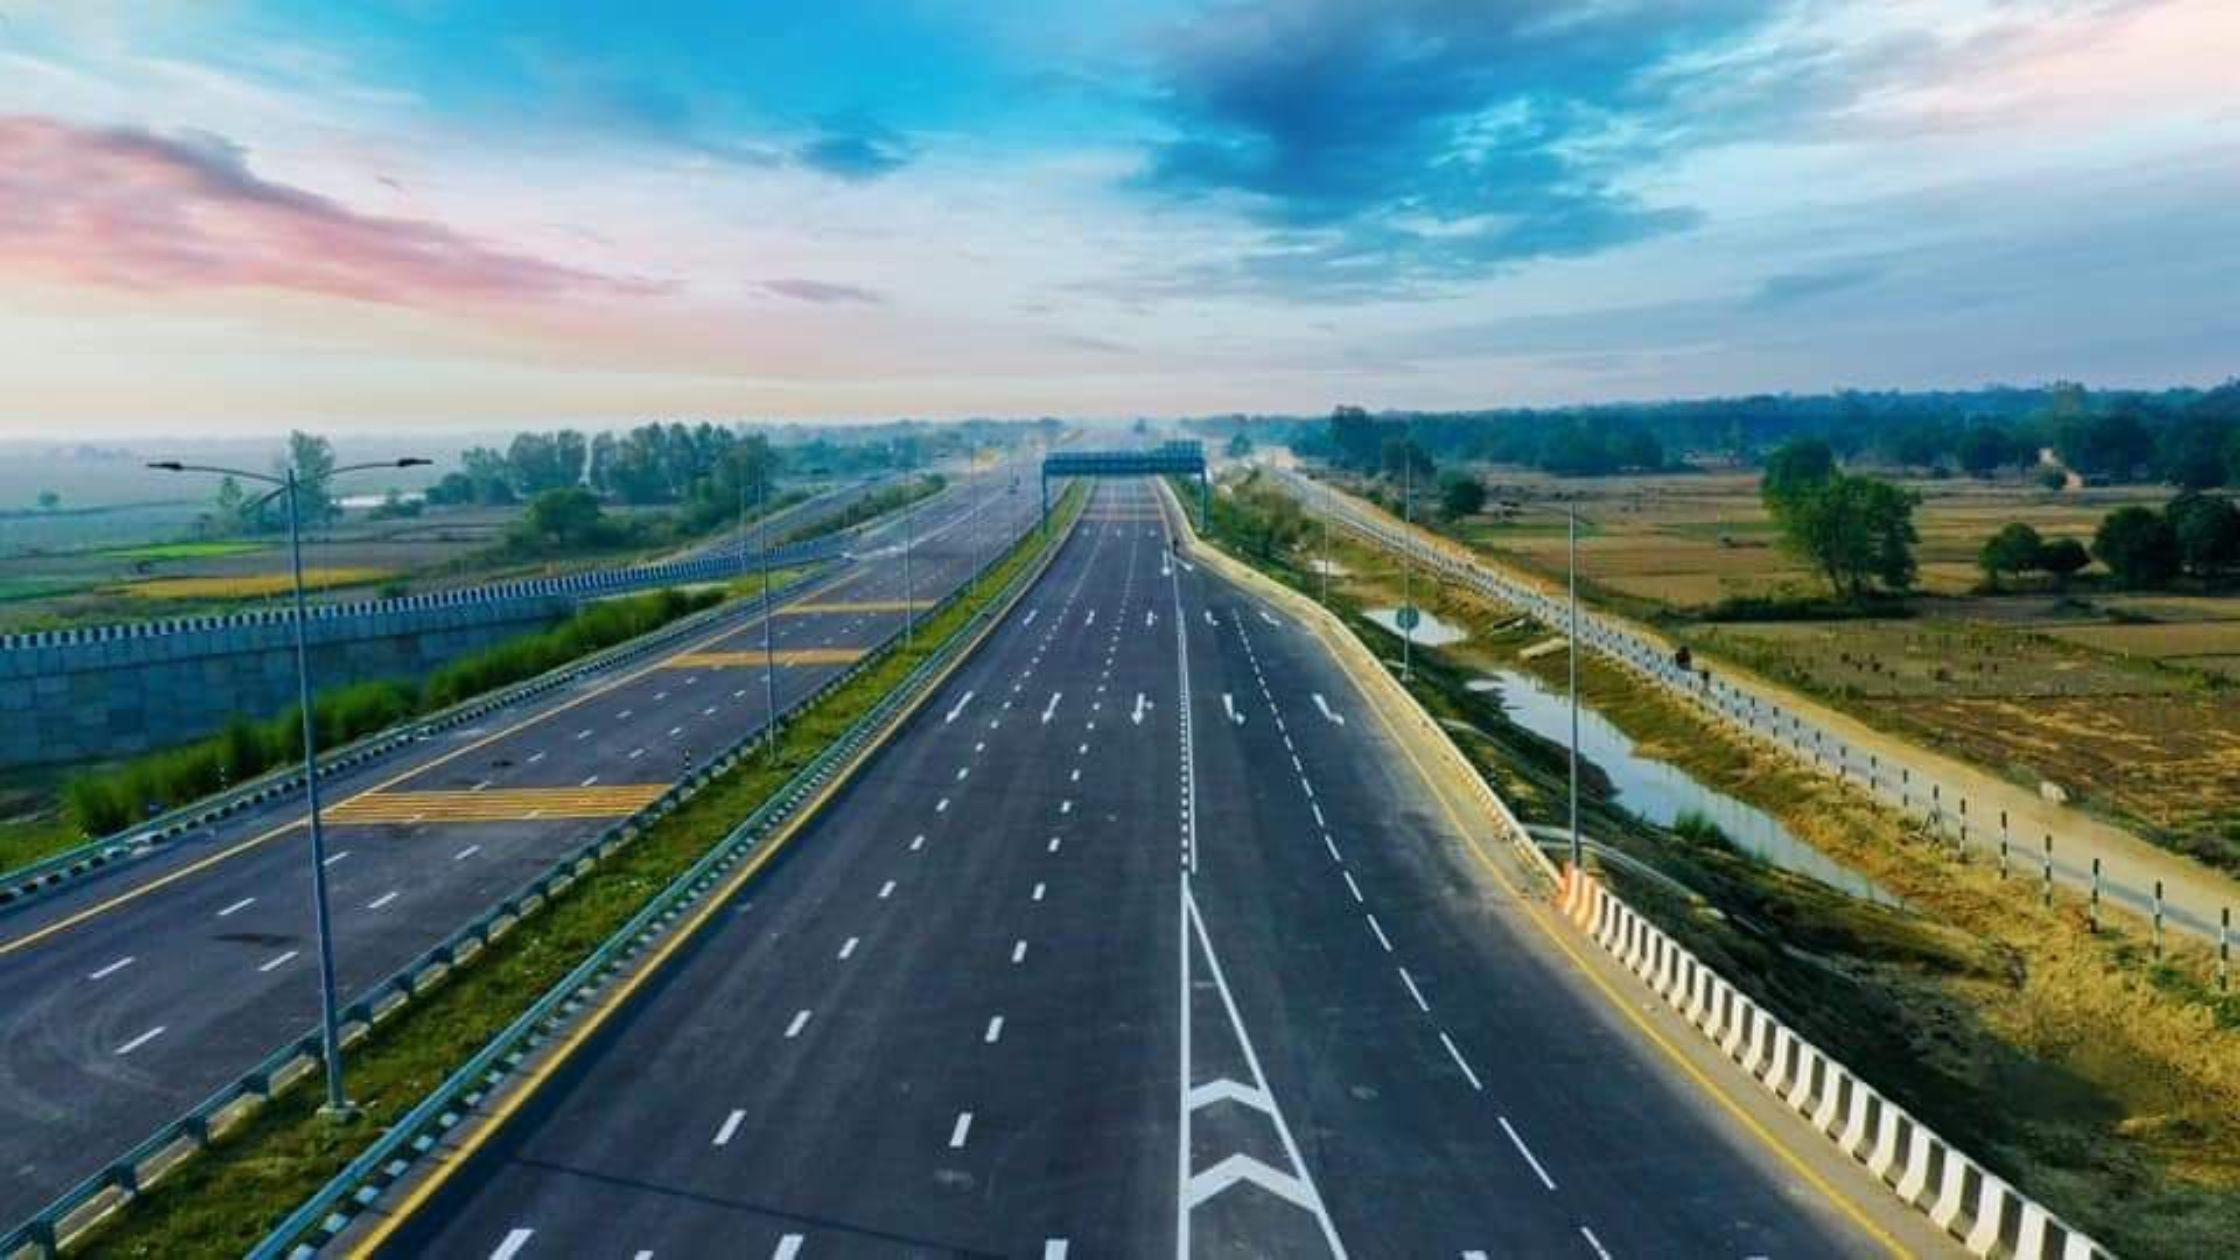 Gateway Of Nepal Raxaul Haldia Expressway Construction Going To Cost 54 Thousand Crore Rupees